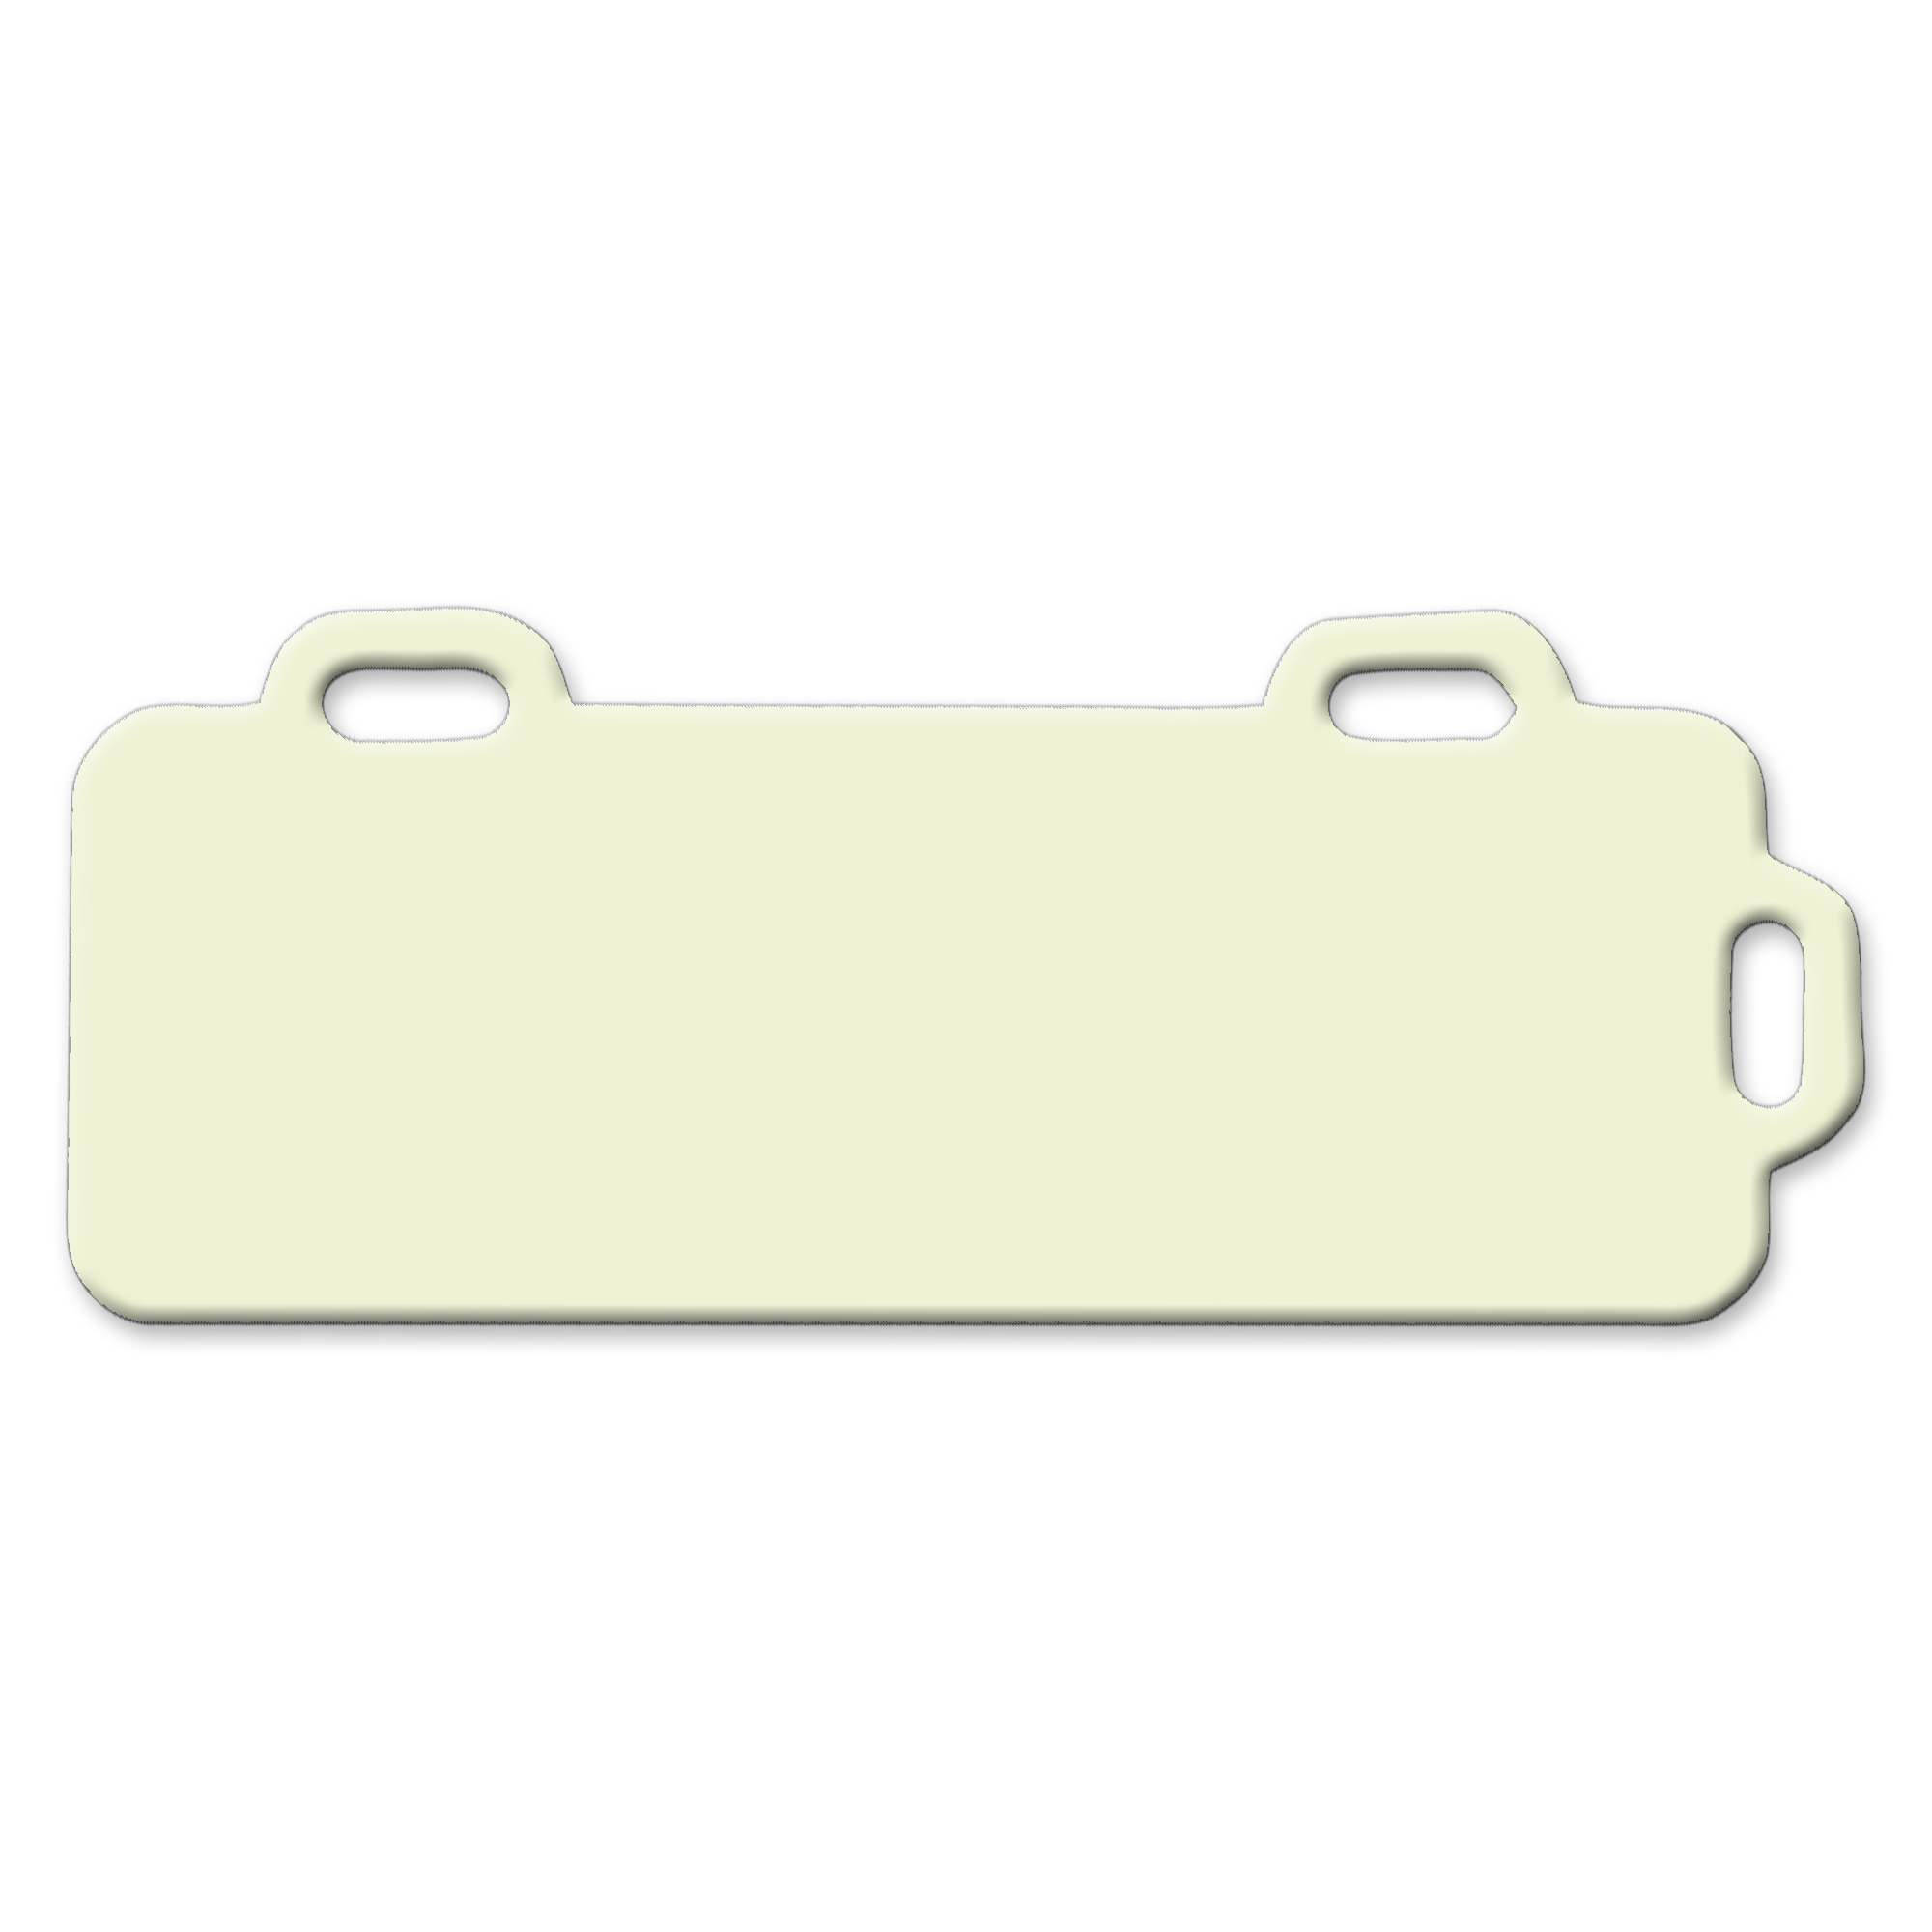 PTL Sieve Tray Labels Image